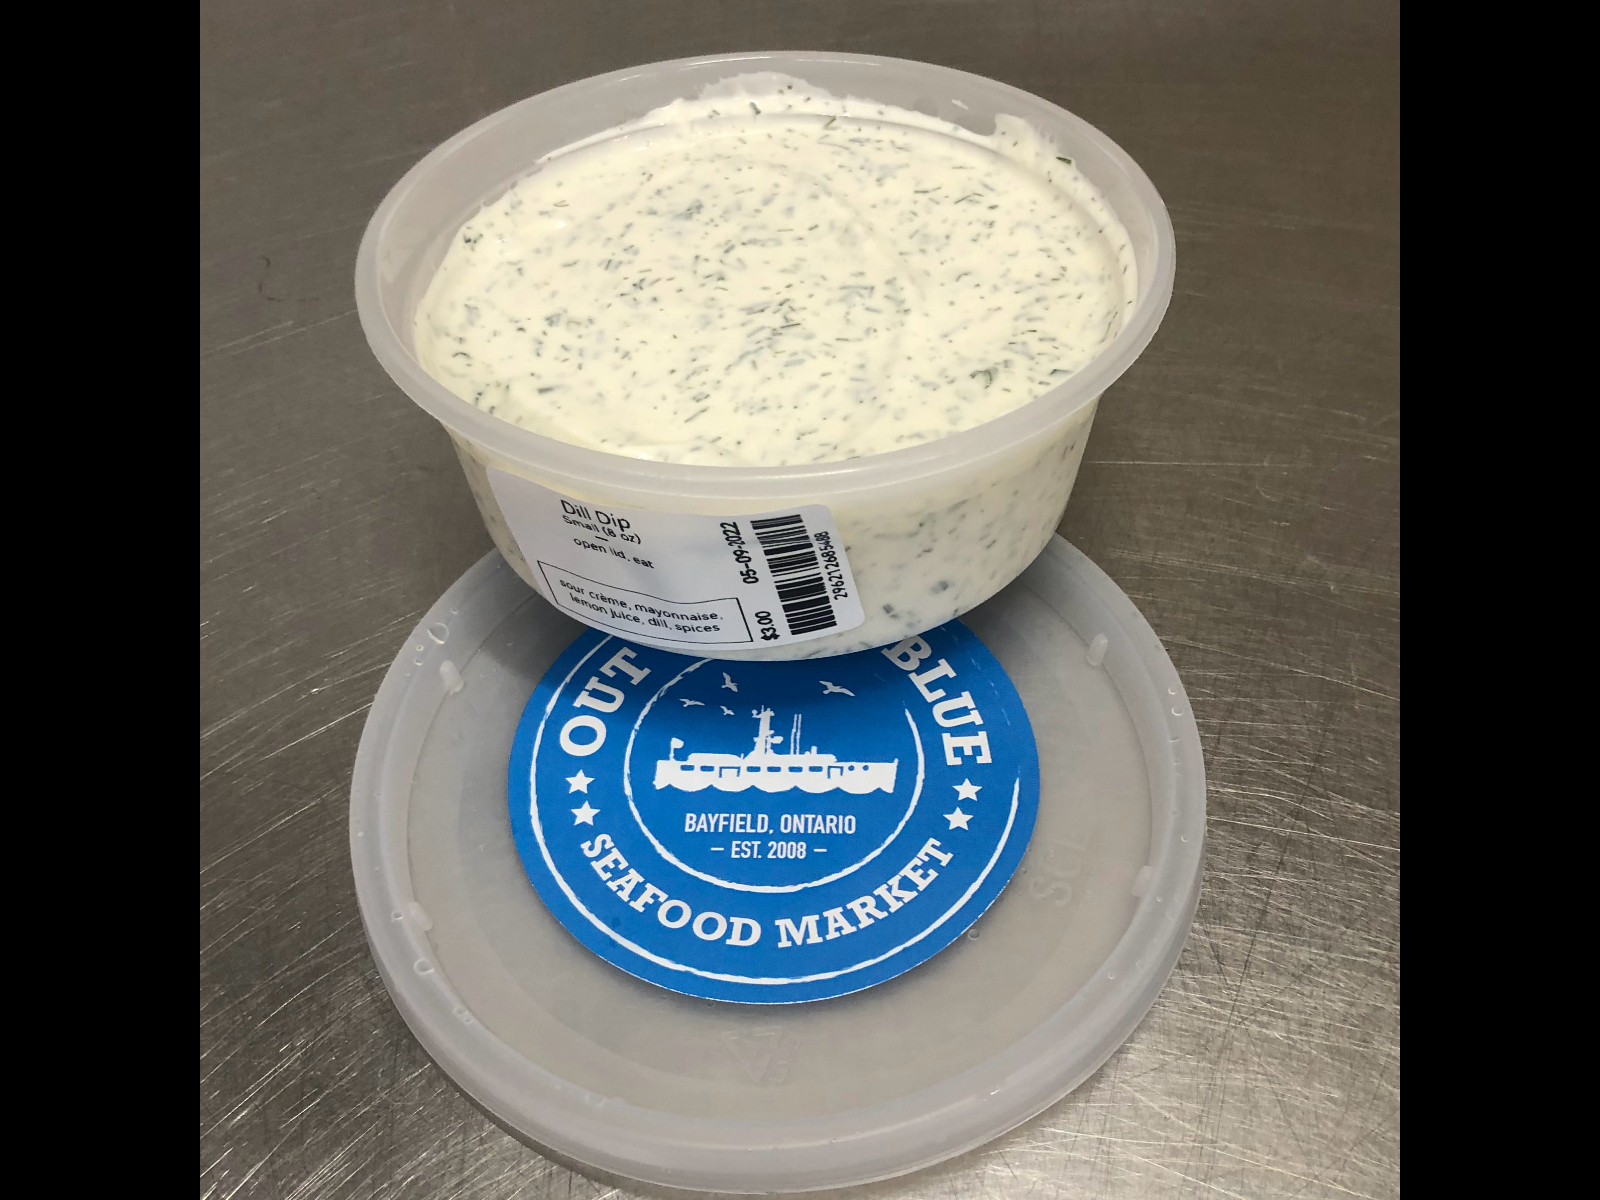 Out of the Blue // Seafood Market // Bayfield, Ontario // Dill Dip 8 oz